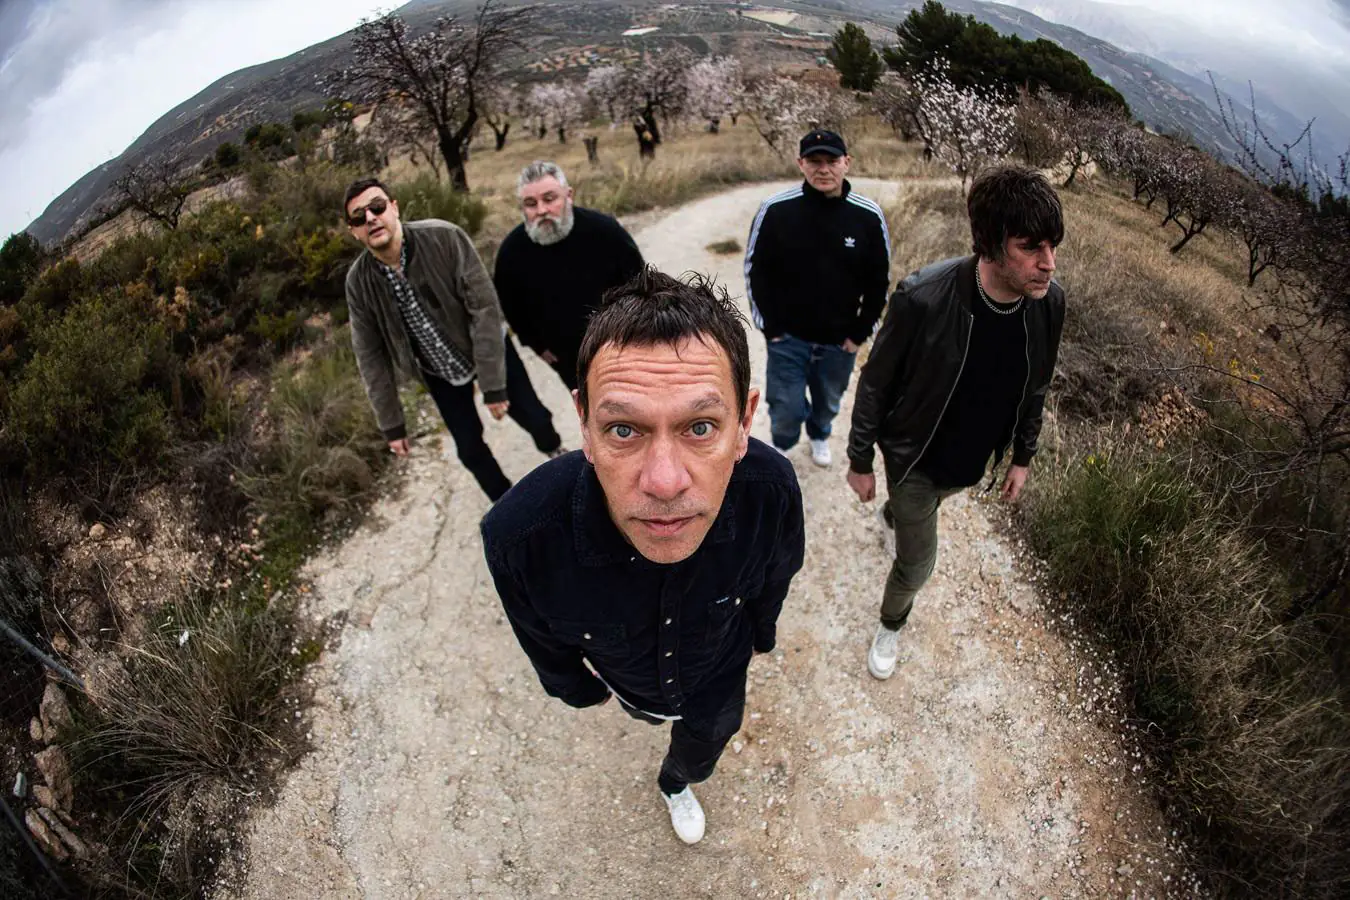 SHED SEVEN release new single ‘Talk of The Town’ taken from forthcoming album ‘A Matter of Time’